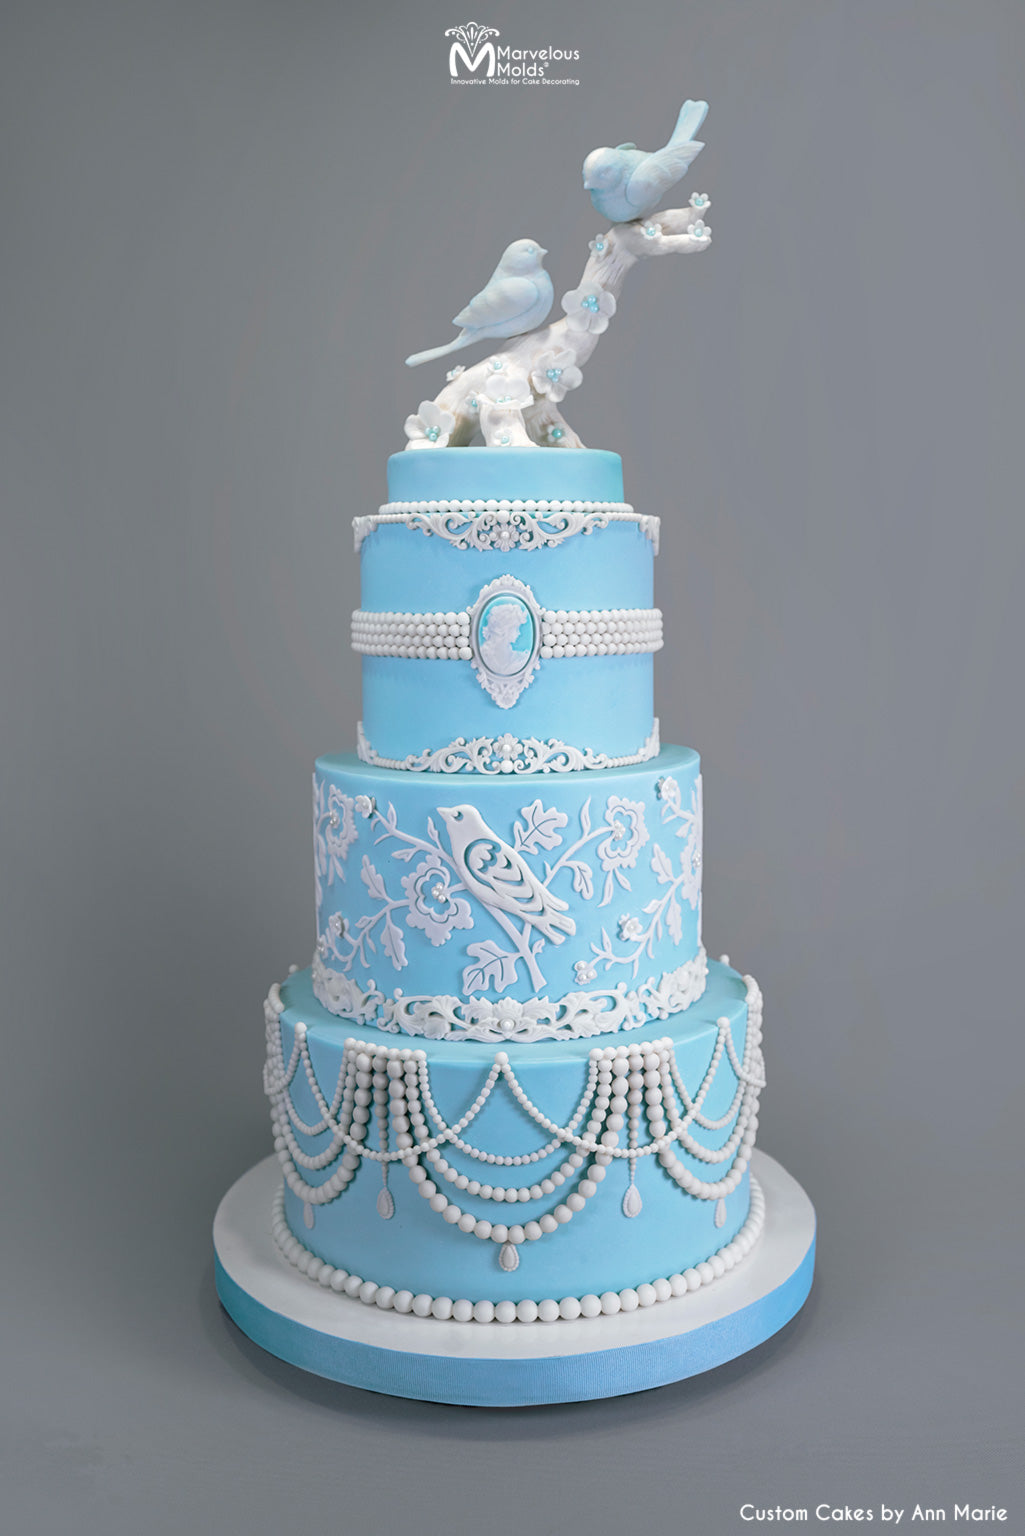 Baby Blue and White Bird and Blossom Cake Decorated Using the Marvelous Molds PinchPro Pearls 8mm Silicone Mold